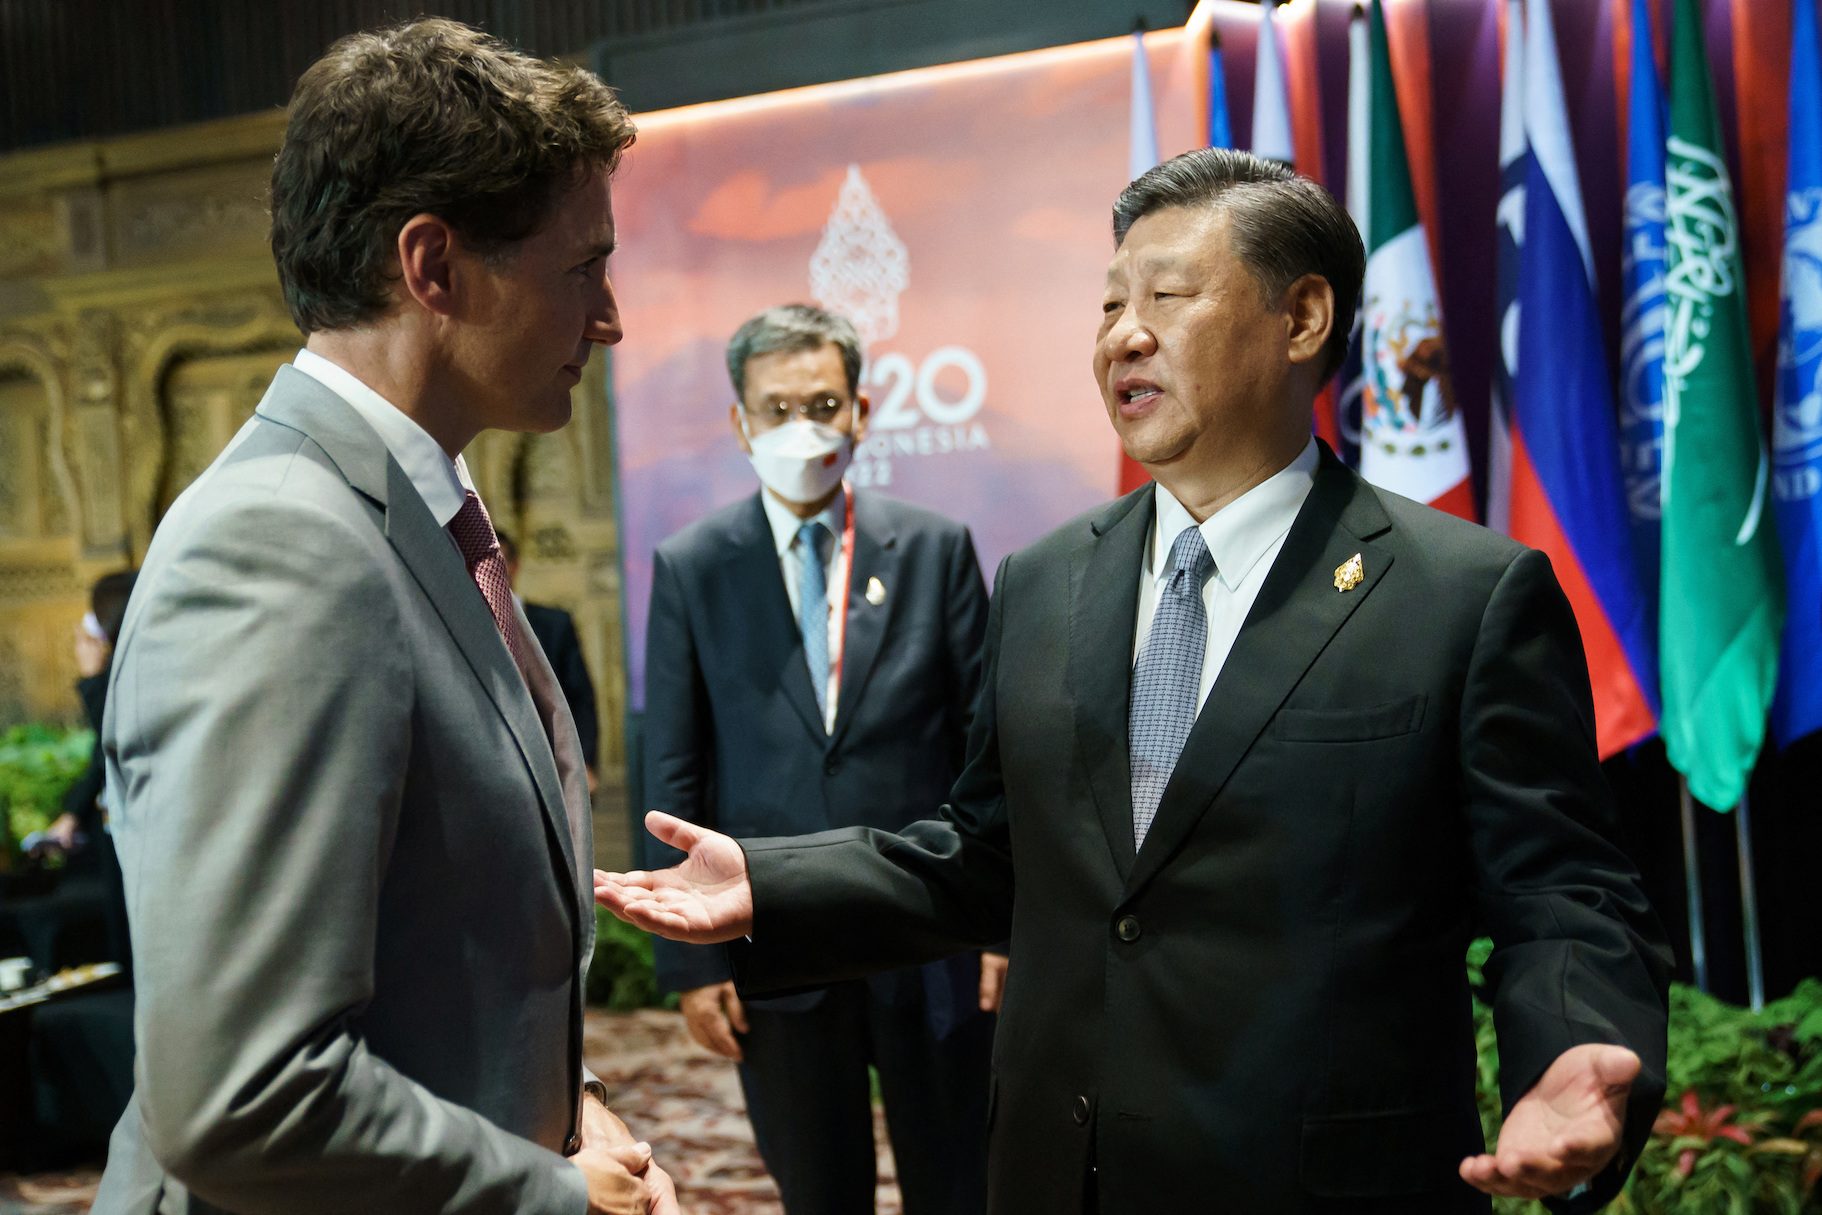 Beijing says testy Xi-Trudeau exchange sparked by leak to media